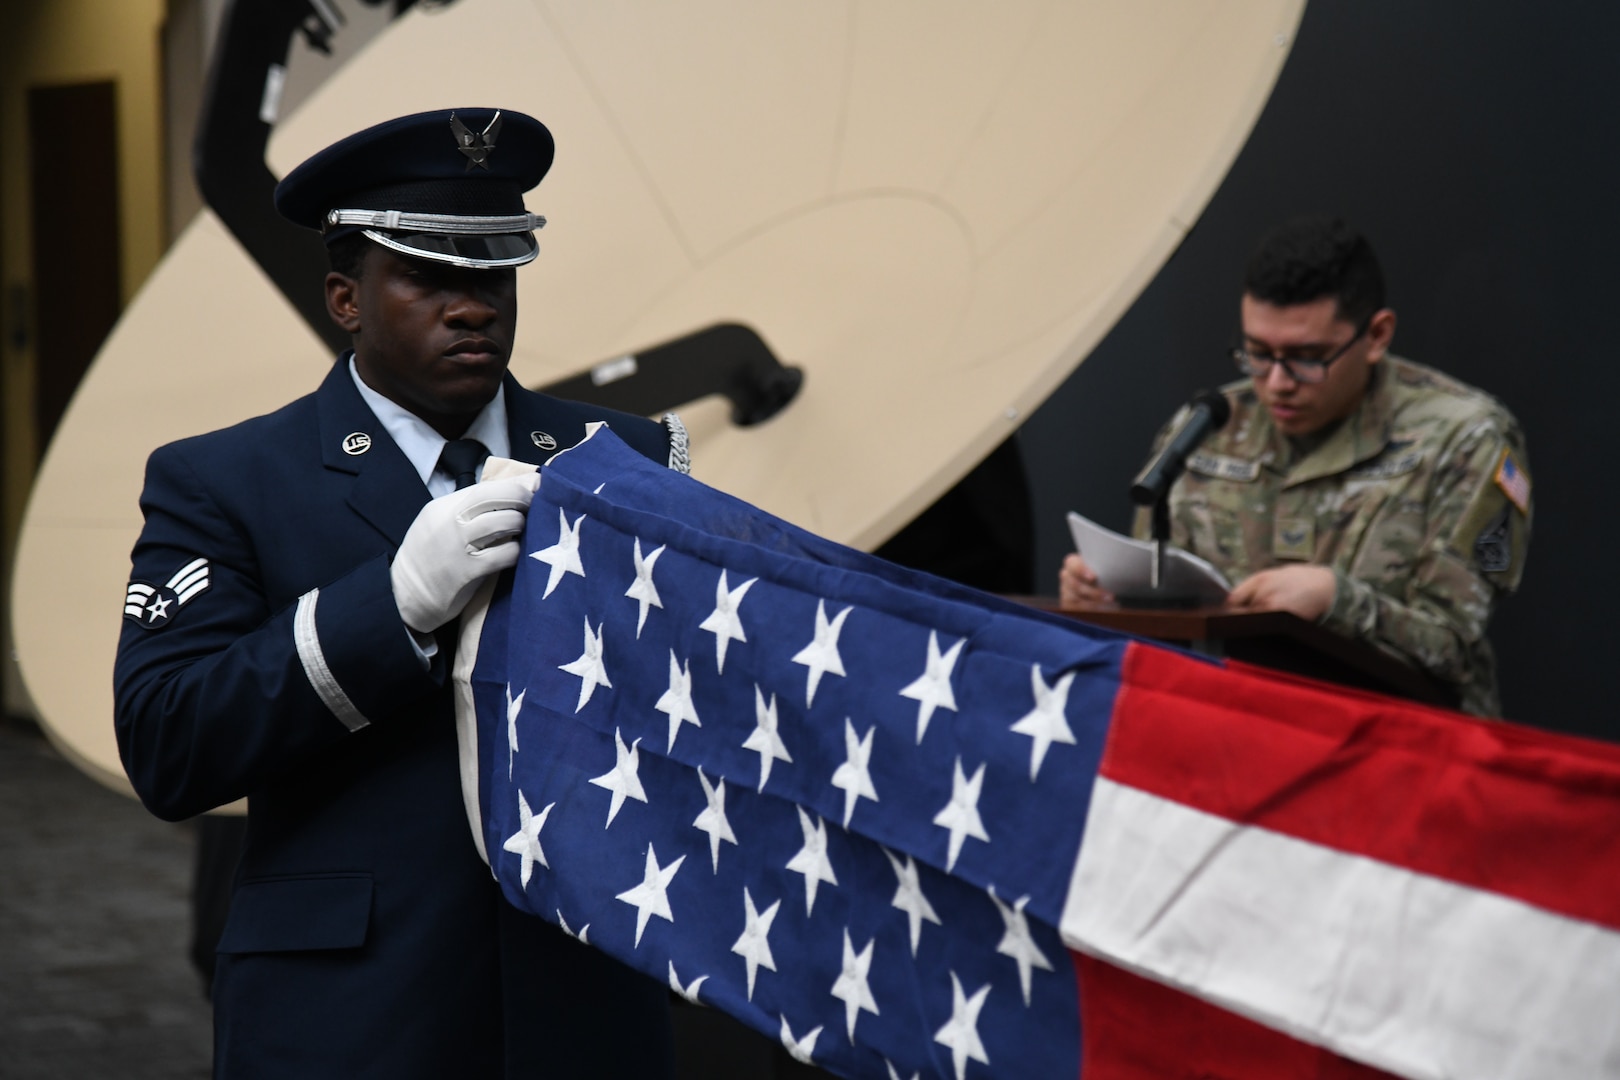 PETERSON SPACE FORCE BASE, Colo. – U.S. Air Force Senior Airman Brandon Whittaker, High Frontier Ceremonial Guardsman, folds an American flag during a Space Delta 3 – Space Electromagnetic Warfare pre-deployment-flag-folding ceremony at Peterson Space Force Base, Colorado, 2022. Flags folded at these ceremonies are flown during deployment by members from DEL 3. DEL 3’s ceremonial tradition of folding flags to bring on deployment, dates back over 20 years to the 76th Space Control Squadron. (U.S. Space Force Photo by Airman 1st Class Aaron Edwards)